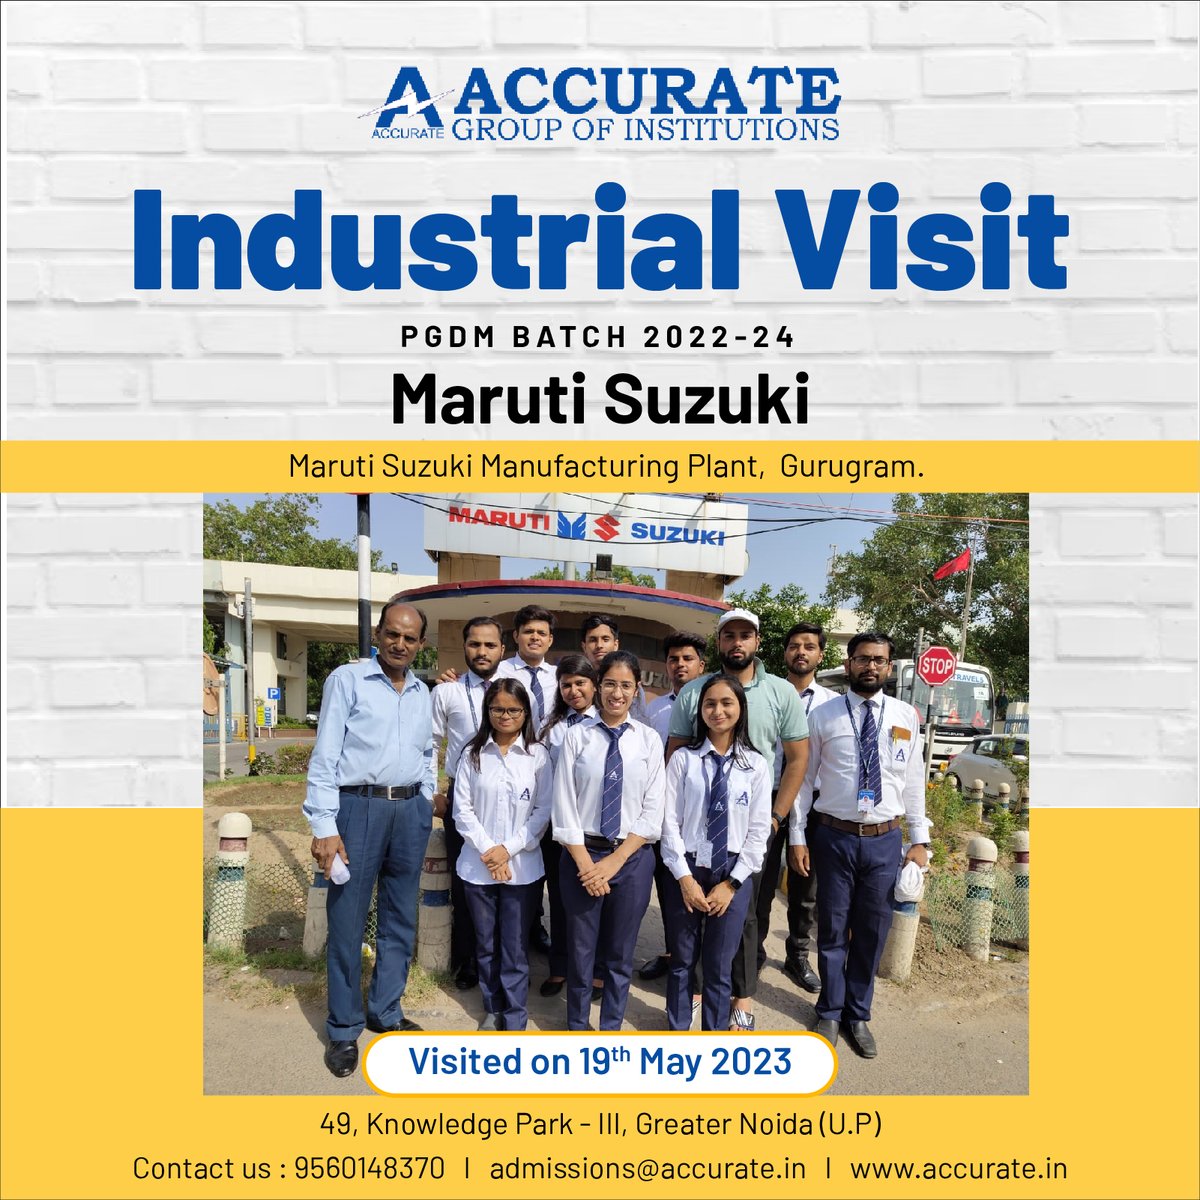 On May 19, 2023, the PGDM Batch 2022-24 students of Accurate Institute of Management and Technology embarked on an educational trip to the Maruti Suzuki Manufacturing Plant.

@Maruti_Corp

#PGDM #PGDMInstitute #PGDMBestCollege #MBAAdmission #IndustrialTrip #MarutiSuzuki